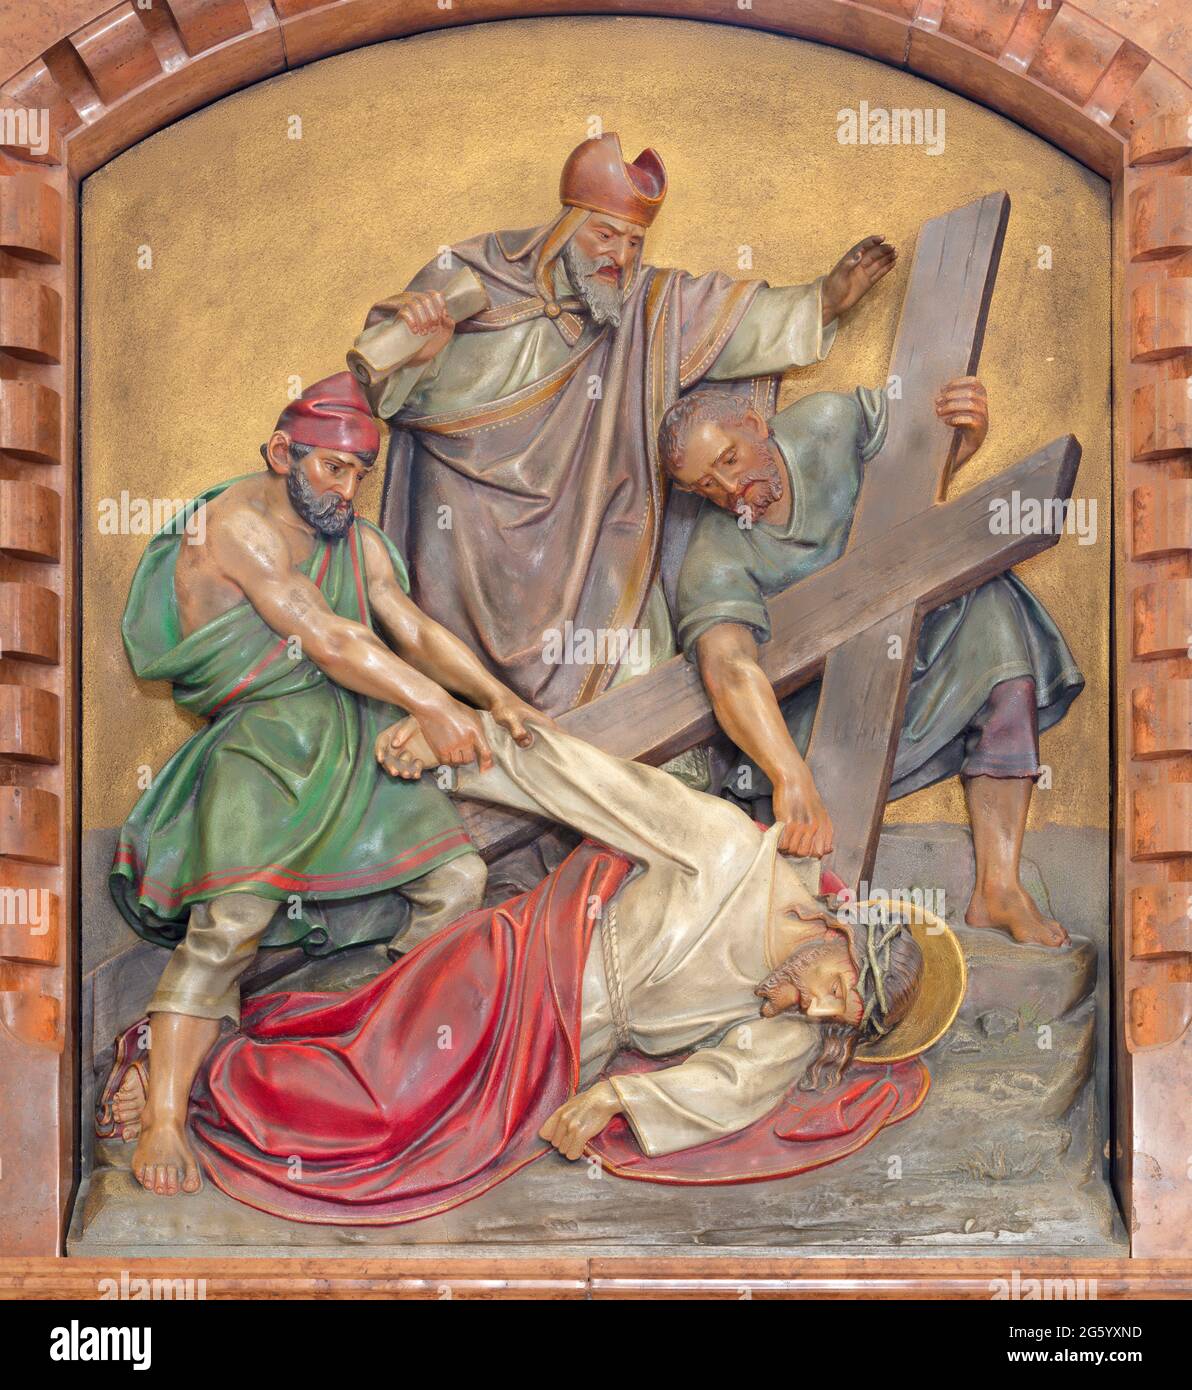 VIENNA, AUSTIRA - JUNI 18, 2021: The relief of Jesus fall under the cross in the Herz Jesu church from begin of 20. cent. by Workroom from Munich. Stock Photo